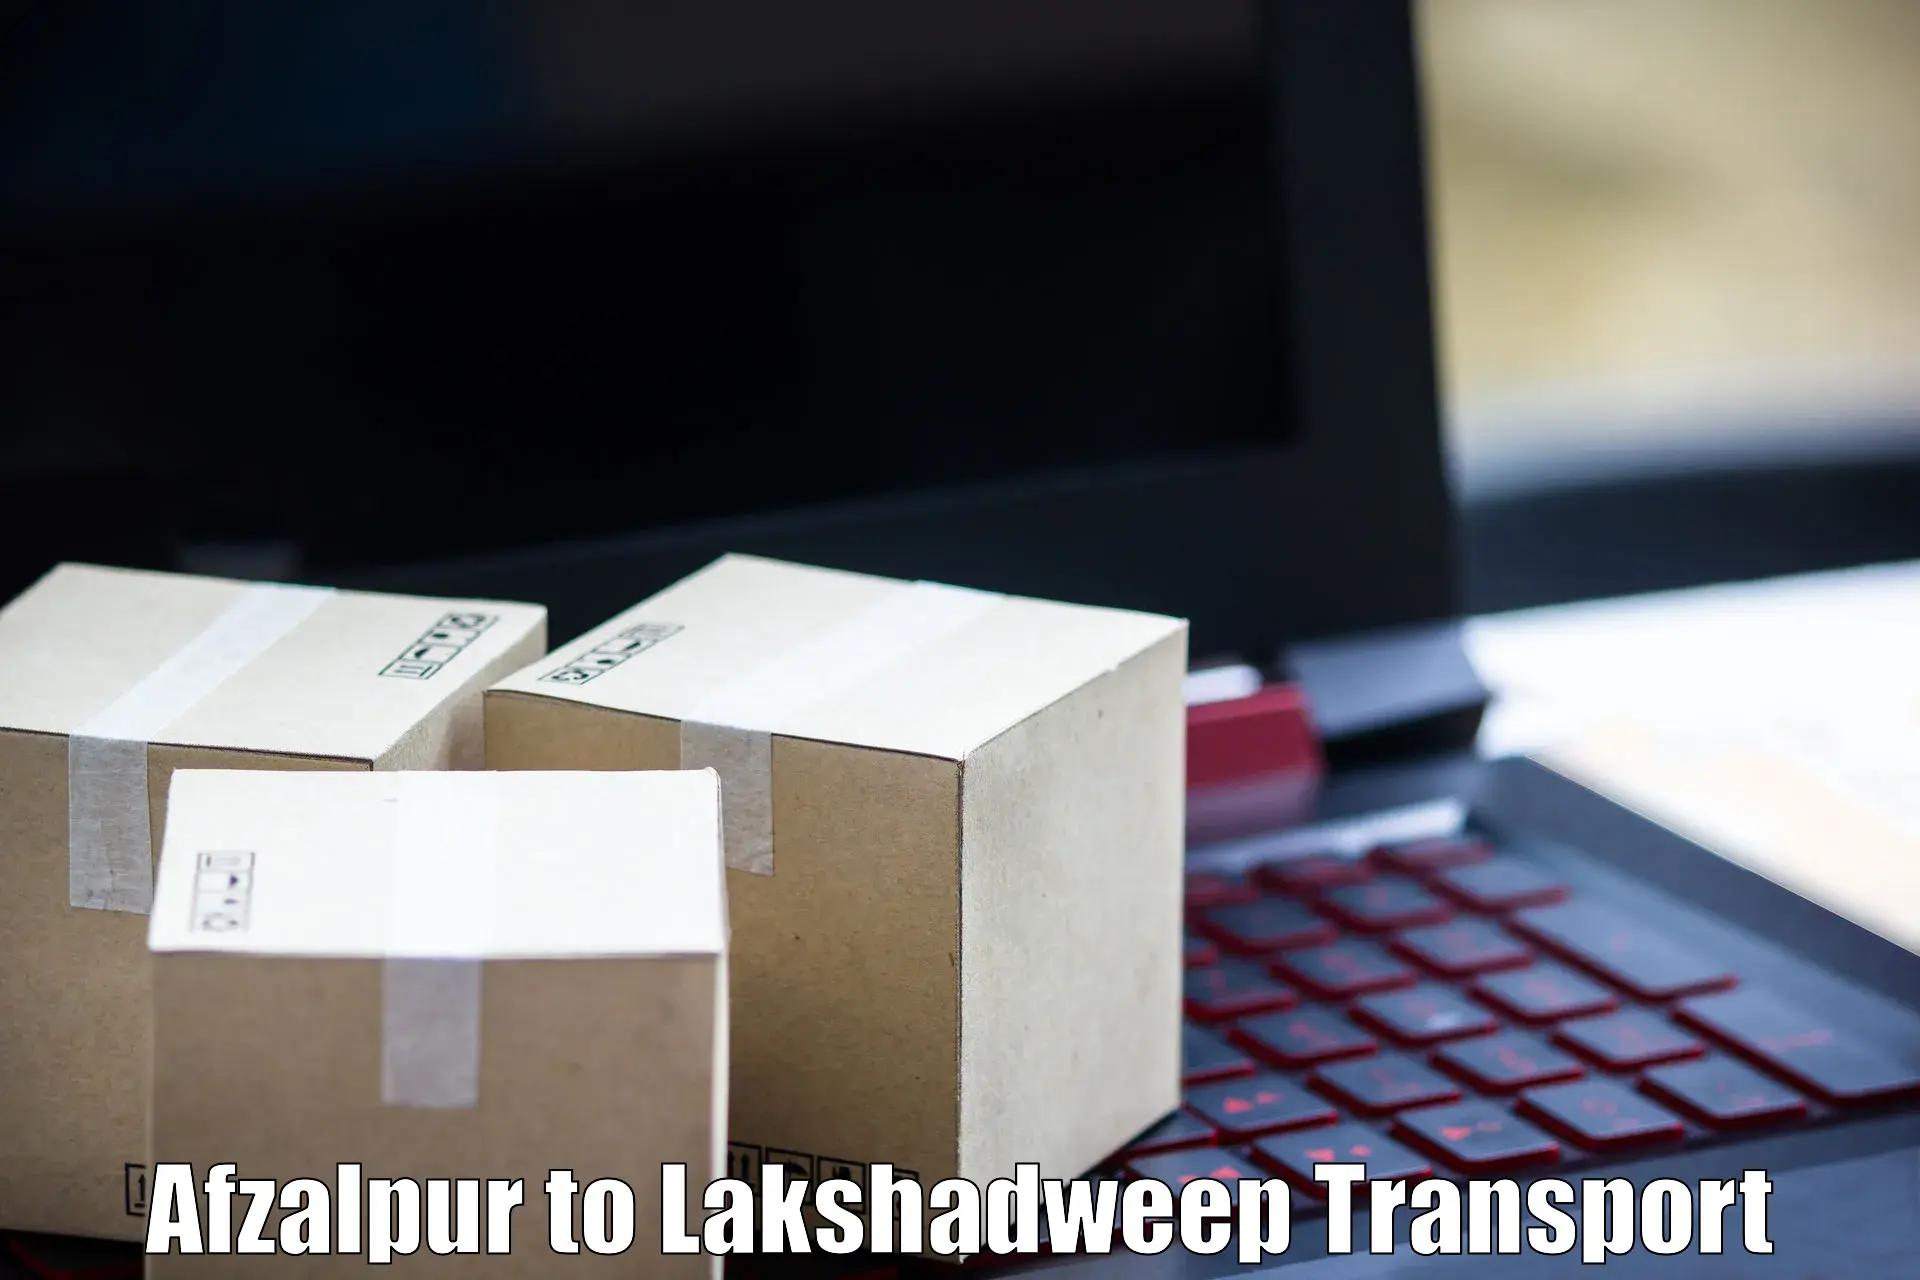 Container transport service Afzalpur to Lakshadweep